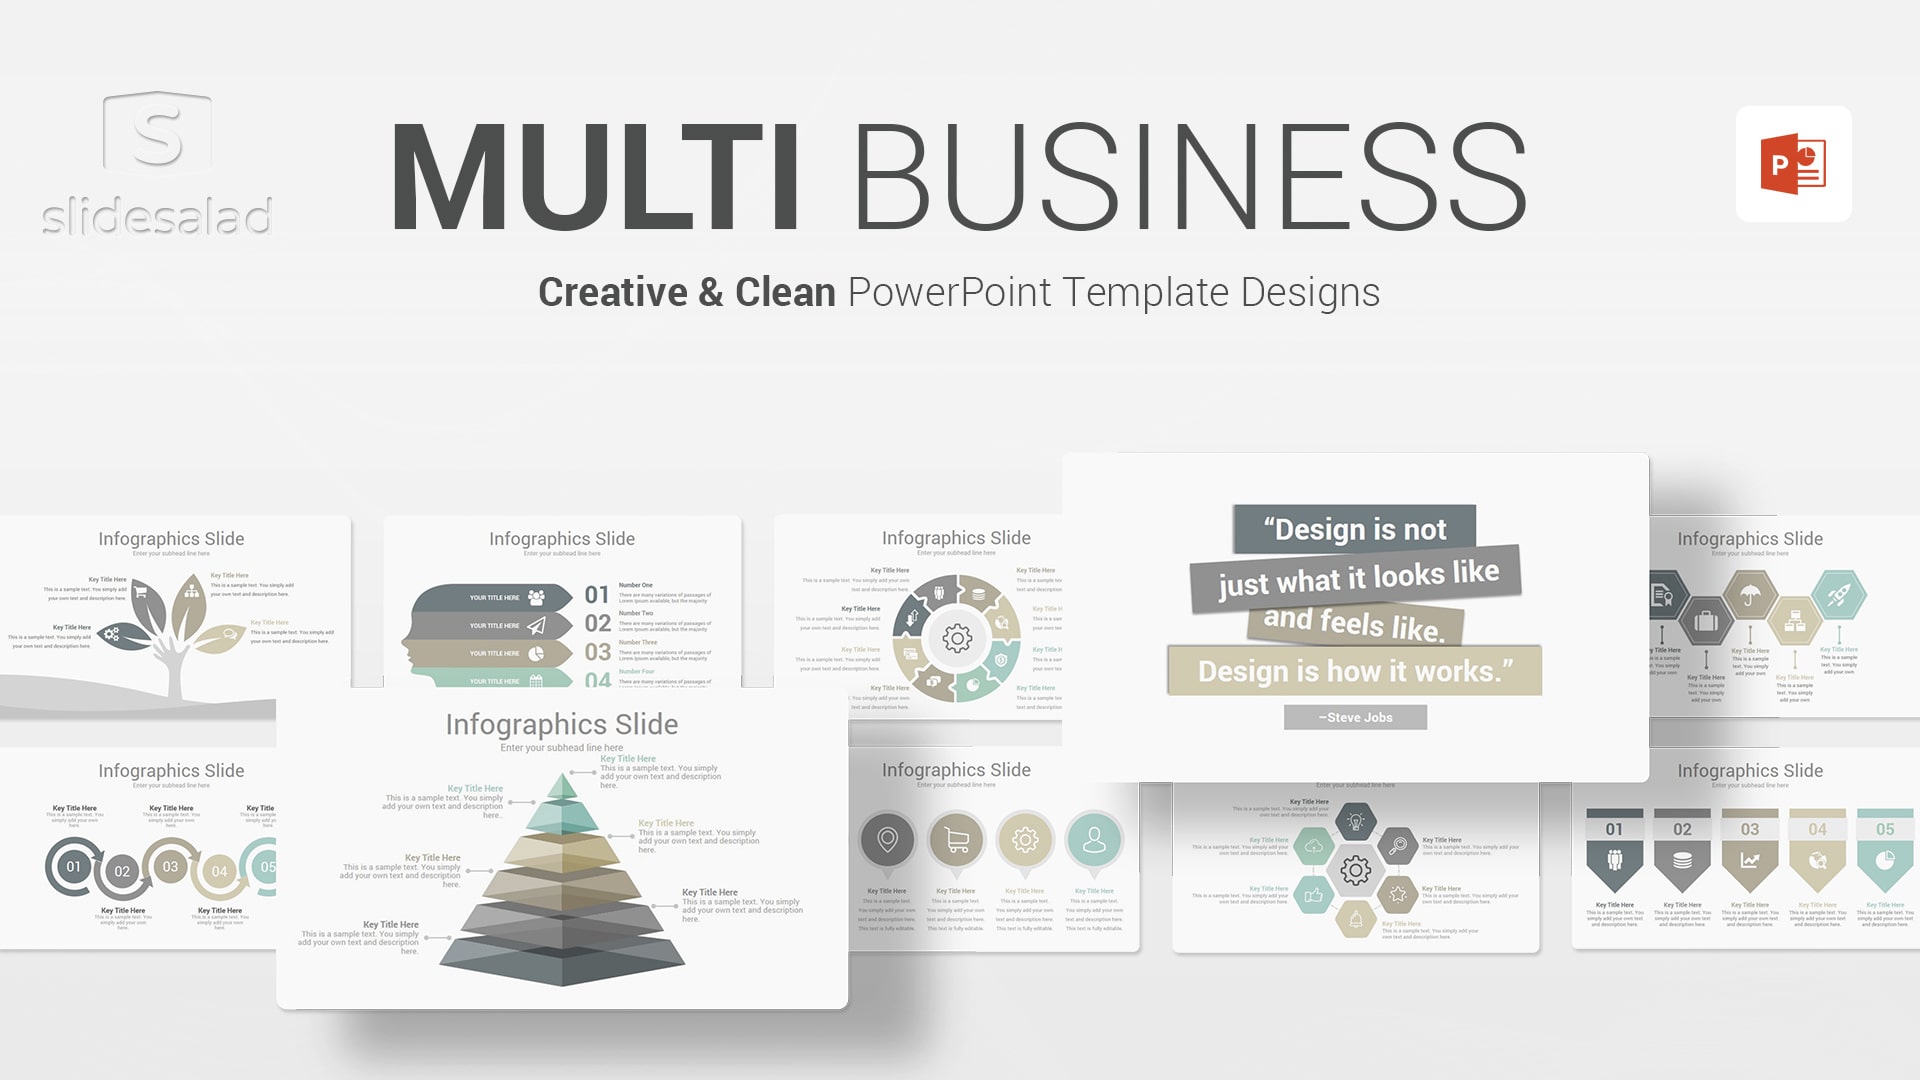 Multi Business PowerPoint Presentation Template - Diverse PPT Templates for a Range of Business Scenarios